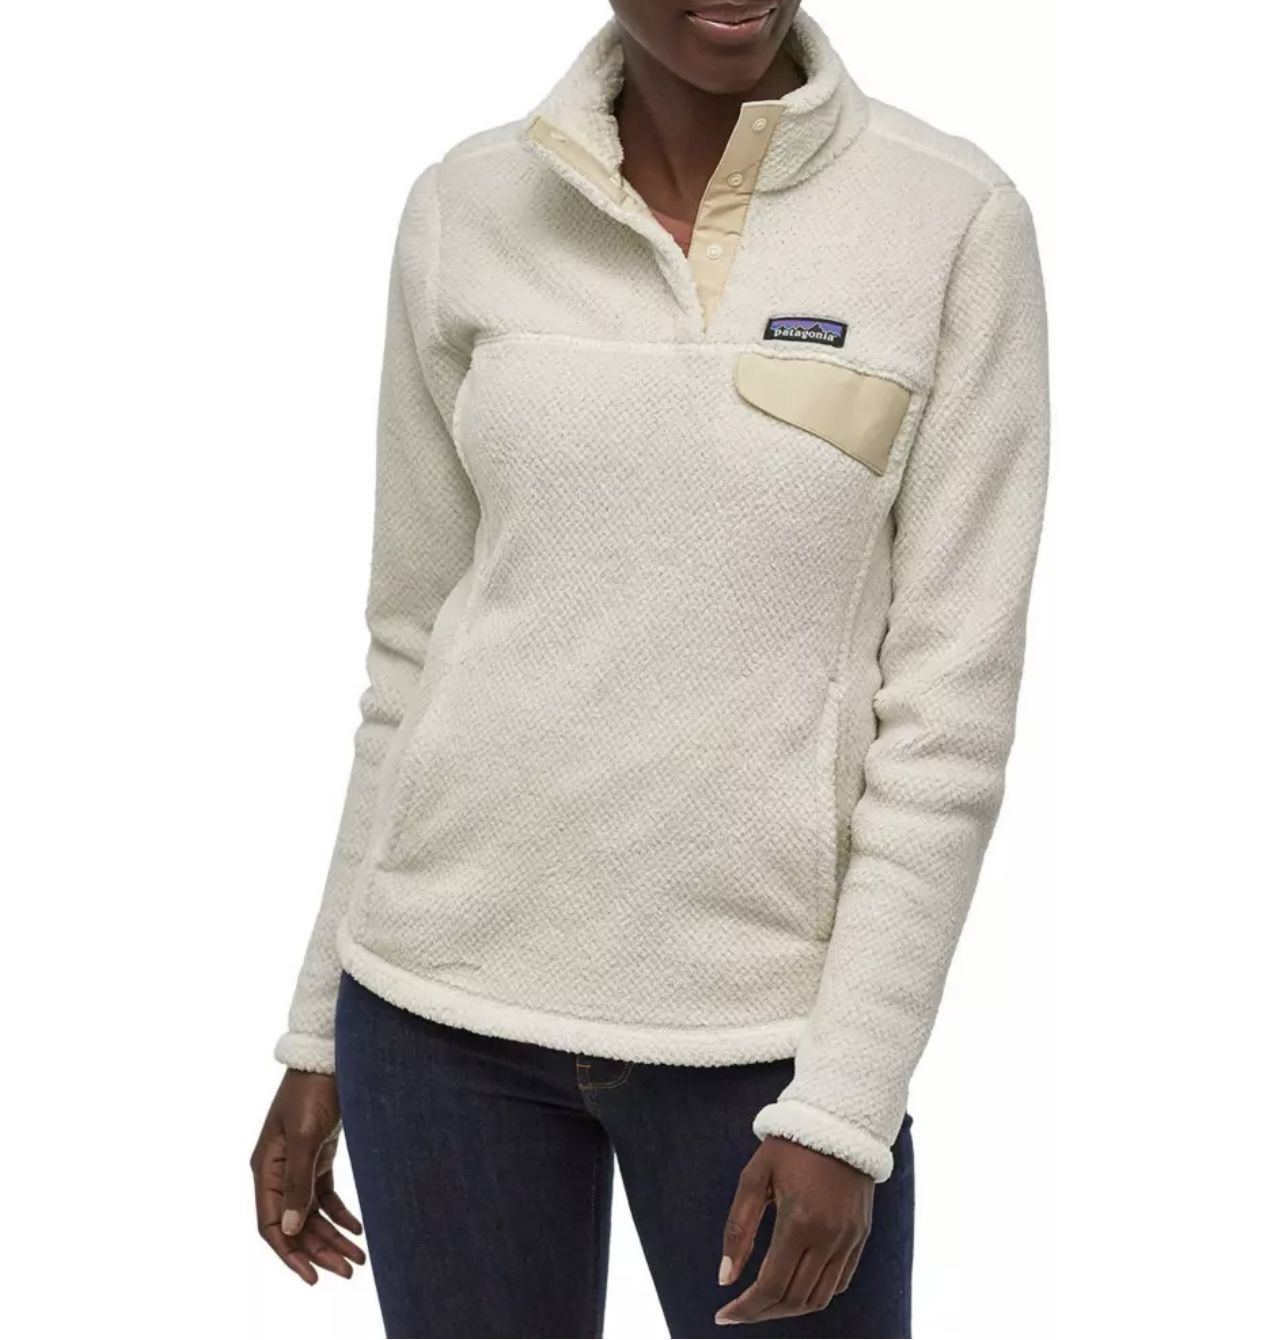 Patagonia Women's Re-Tool Snap-T Pullover